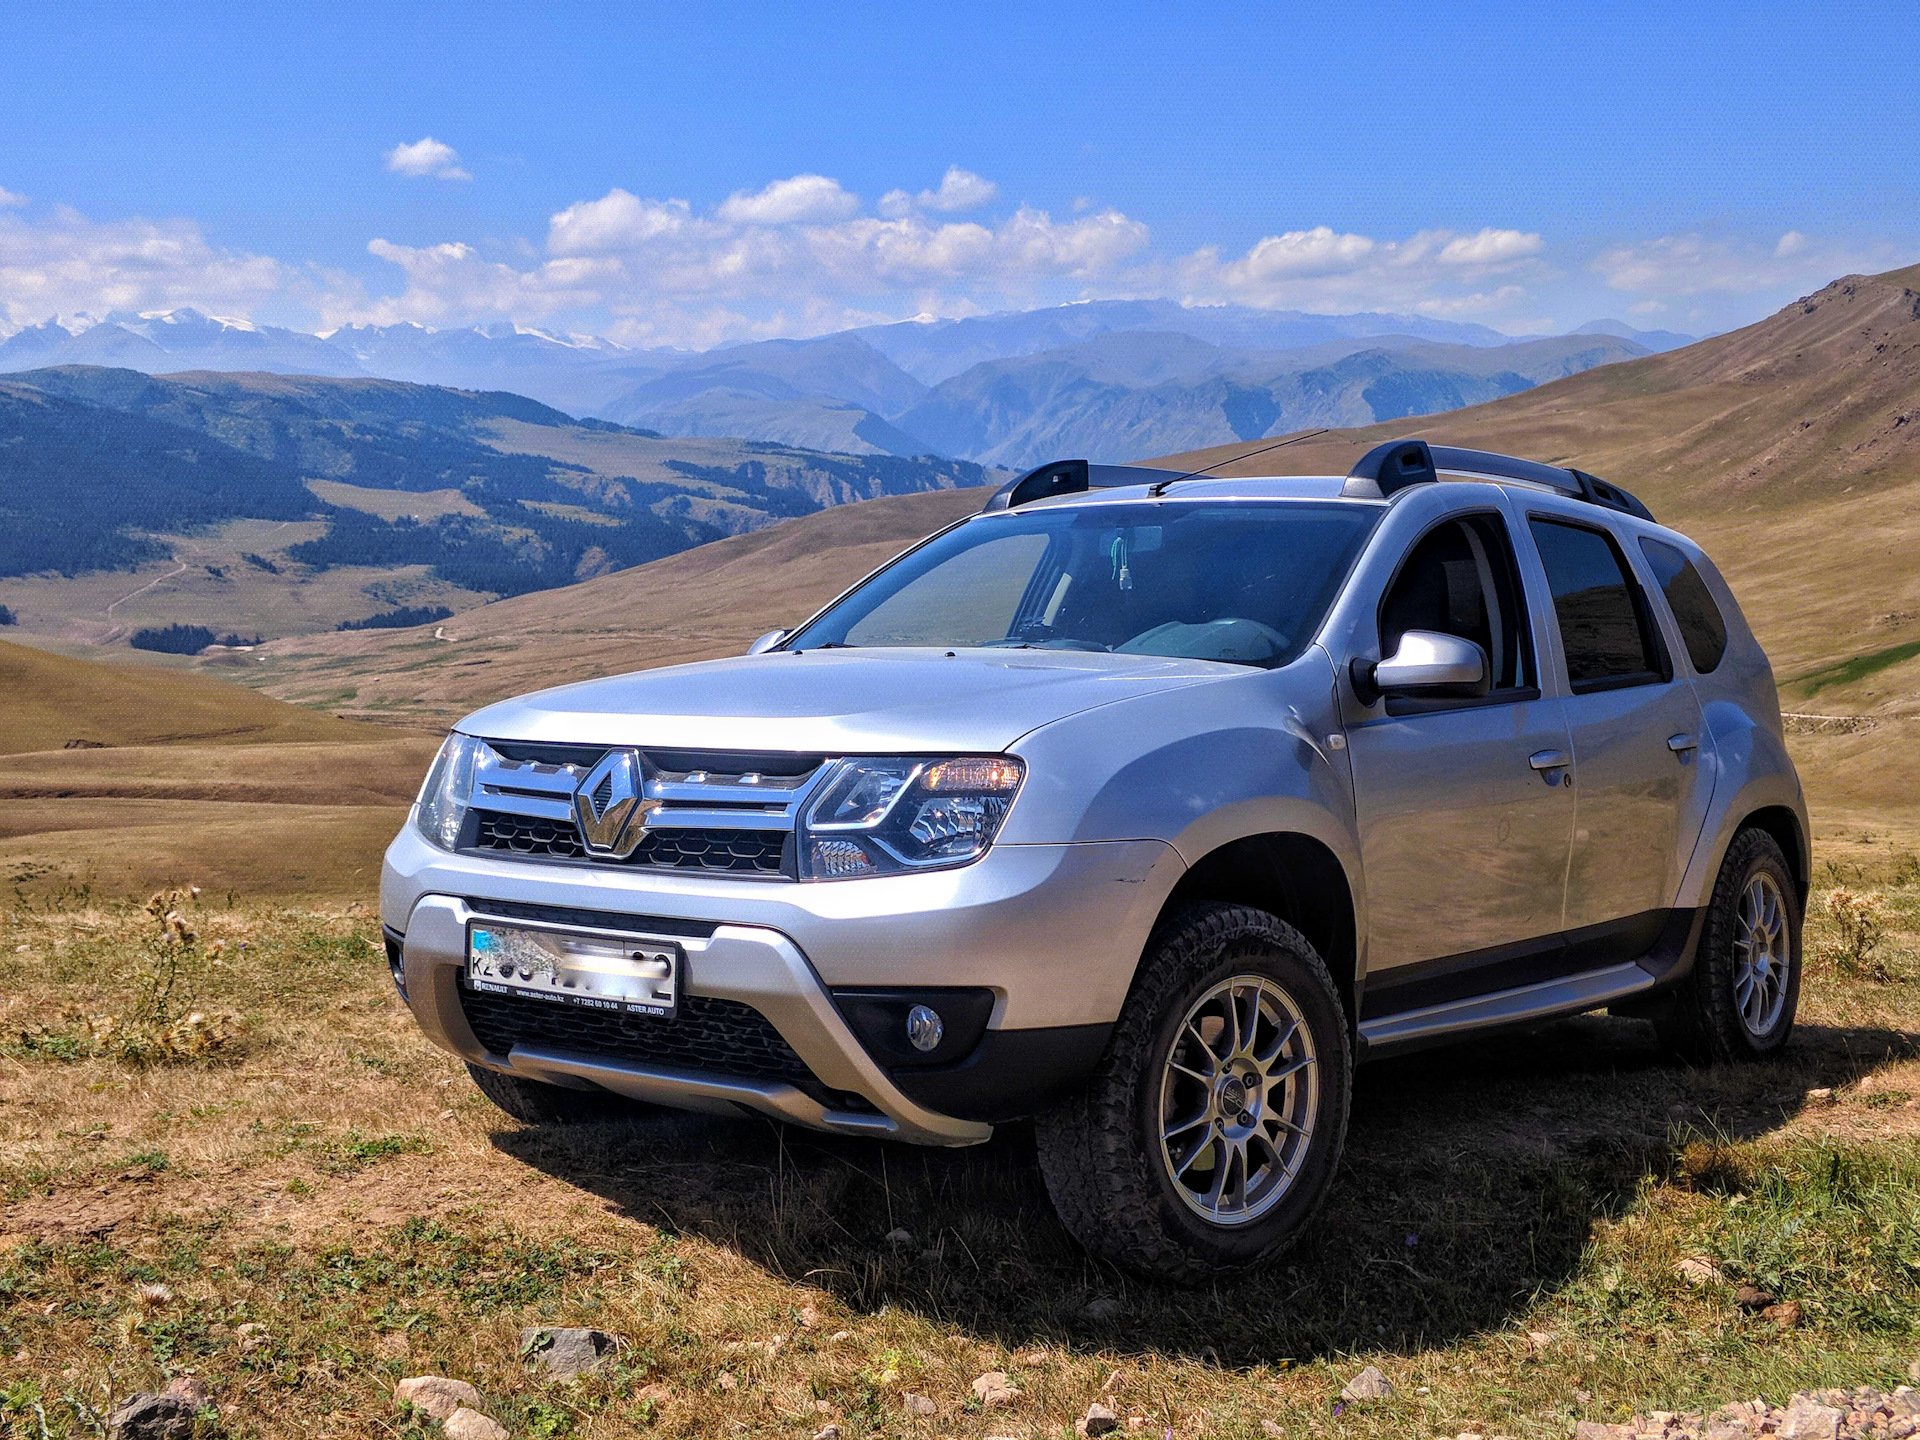 Дастер 2 1.6. Renault Duster 2. Renault Duster 1. Renault Duster 2016. Renault Duster 4.